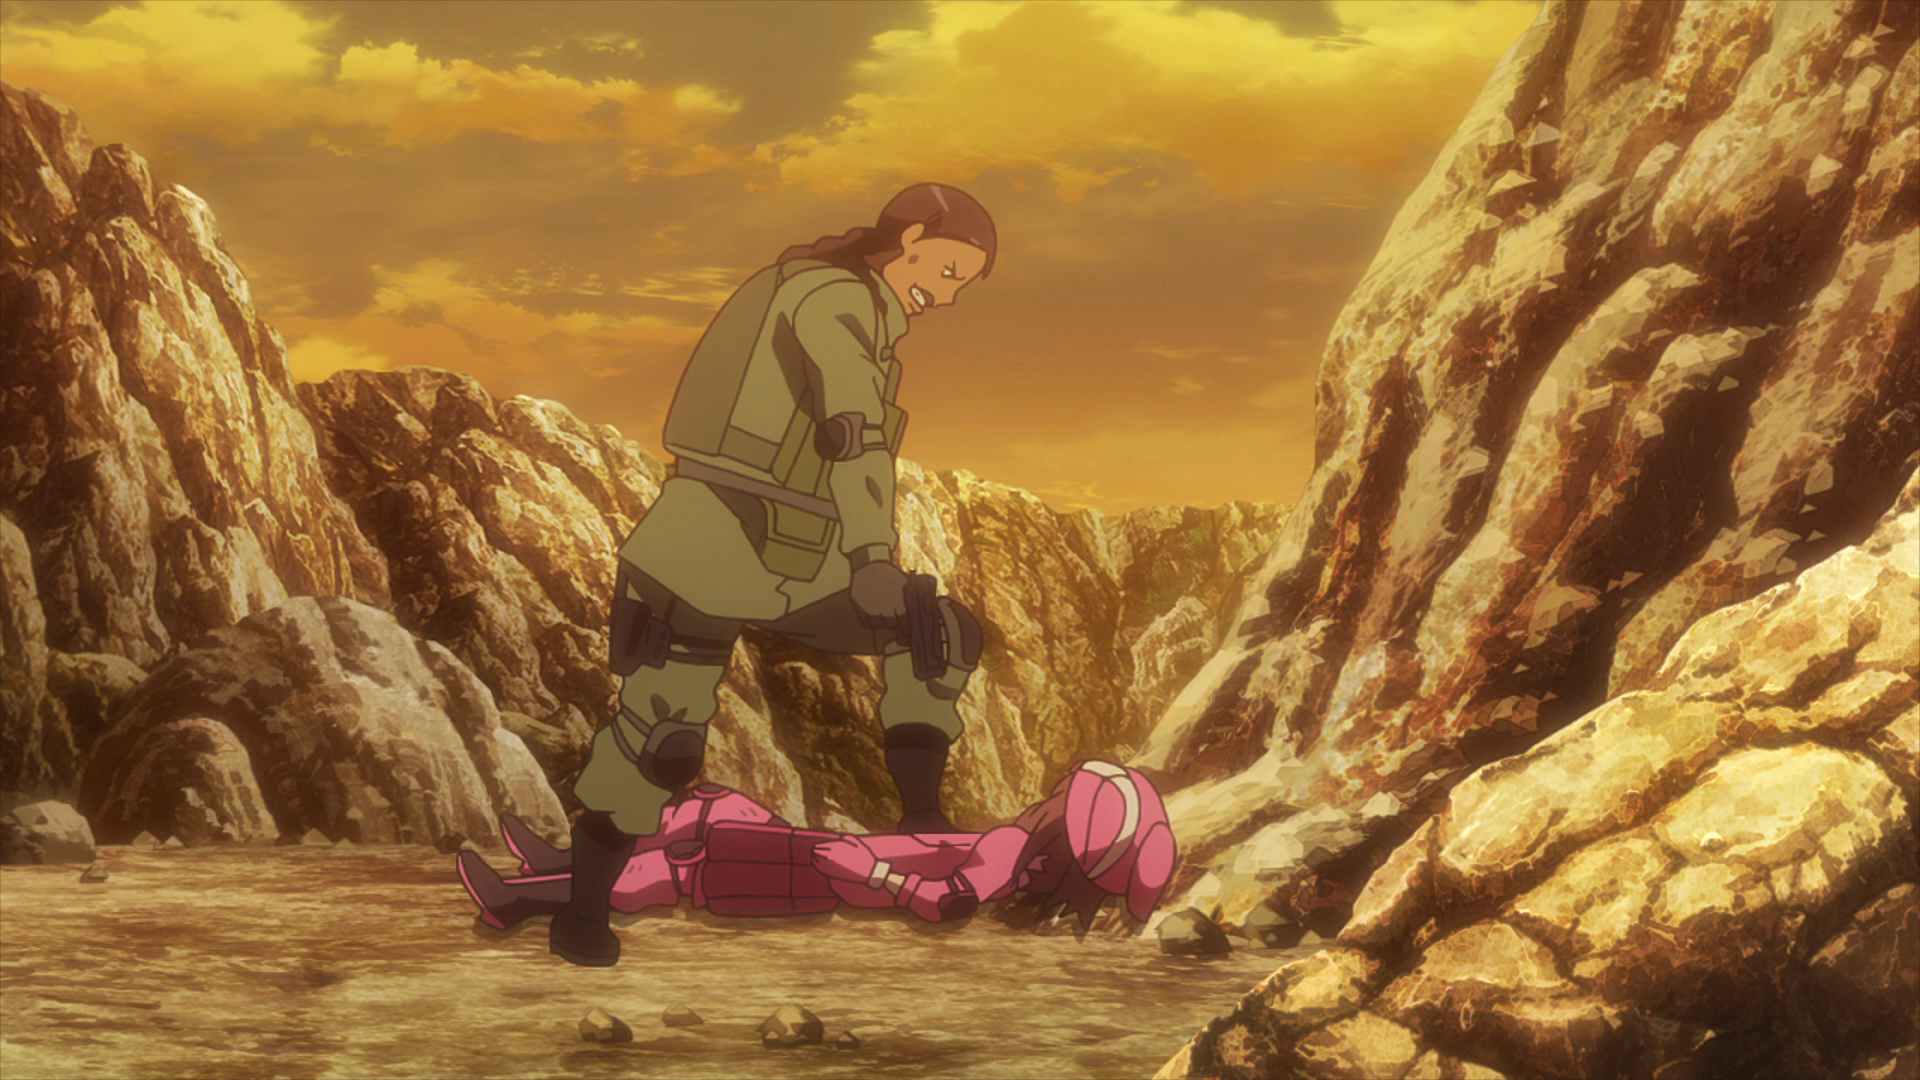 Sword Art Online’s Gun Gale Online Is A Meh Anime, But A Cool (Fake) Game